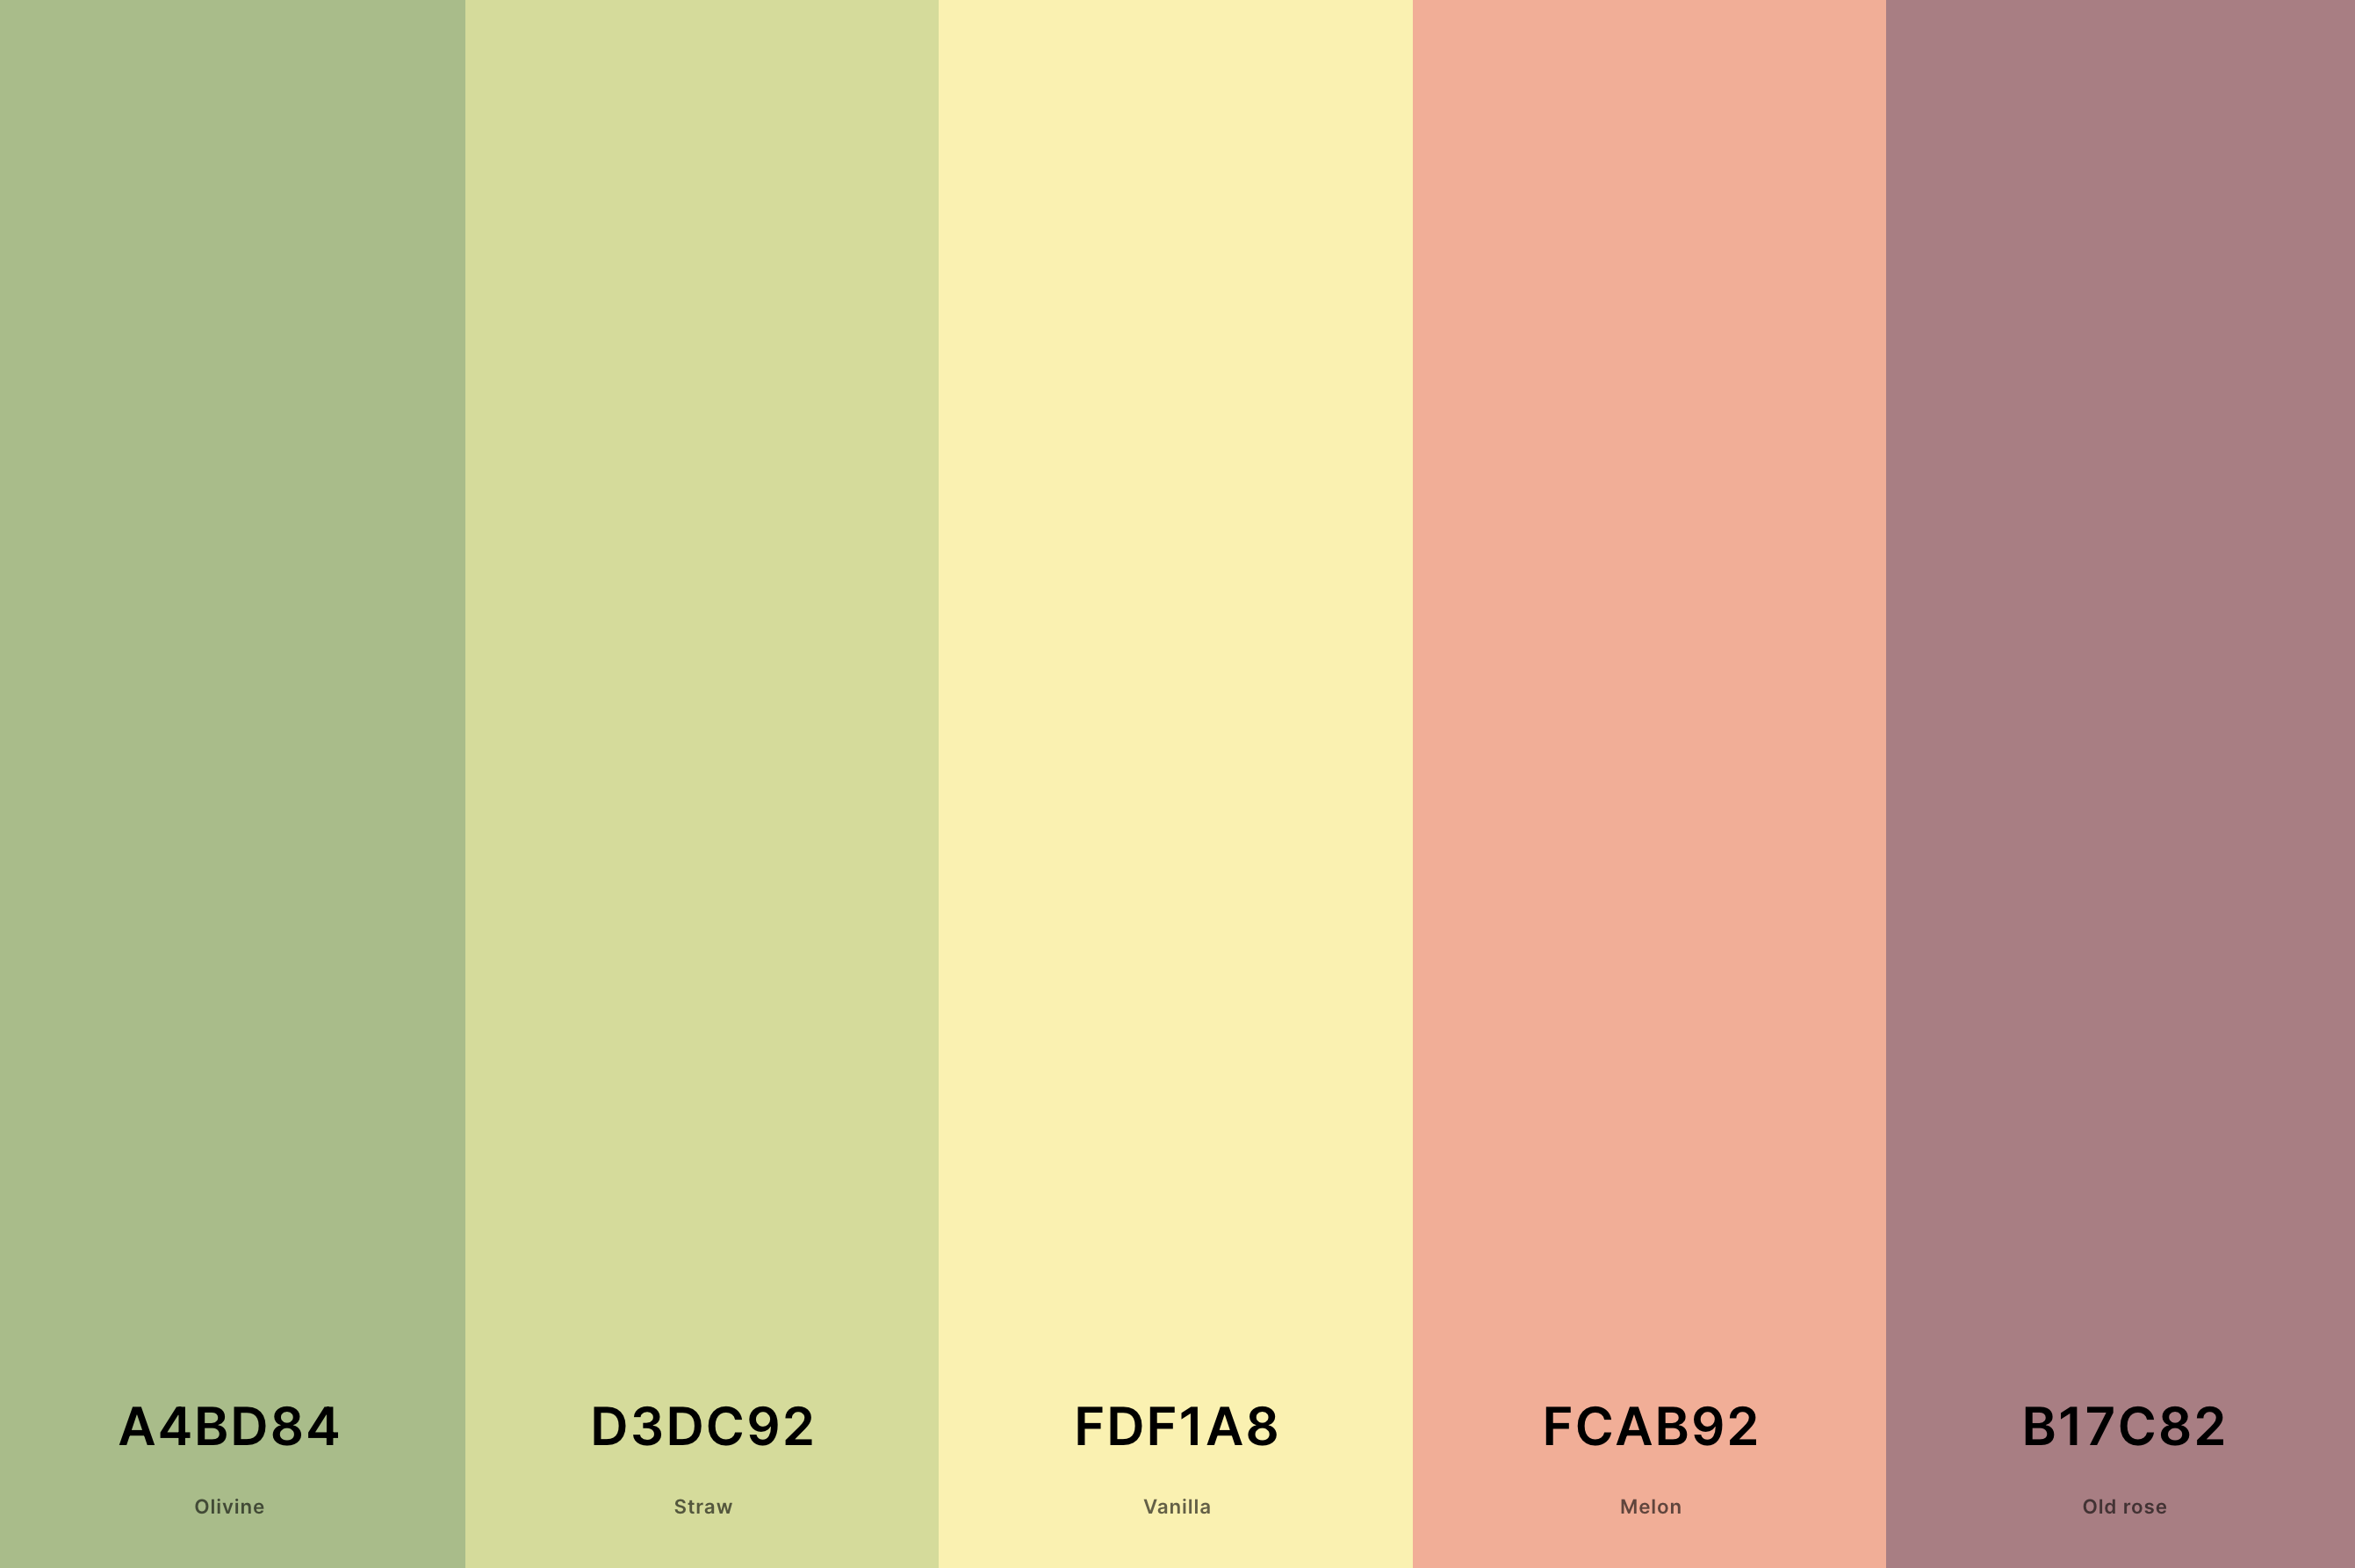 12. Pastel Fall Color Palette Color Palette with Olivine (Hex #A4BD84) + Straw (Hex #D3DC92) + Vanilla (Hex #FDF1A8) + Melon (Hex #FCAB92) + Old Rose (Hex #B17C82) Color Palette with Hex Codes